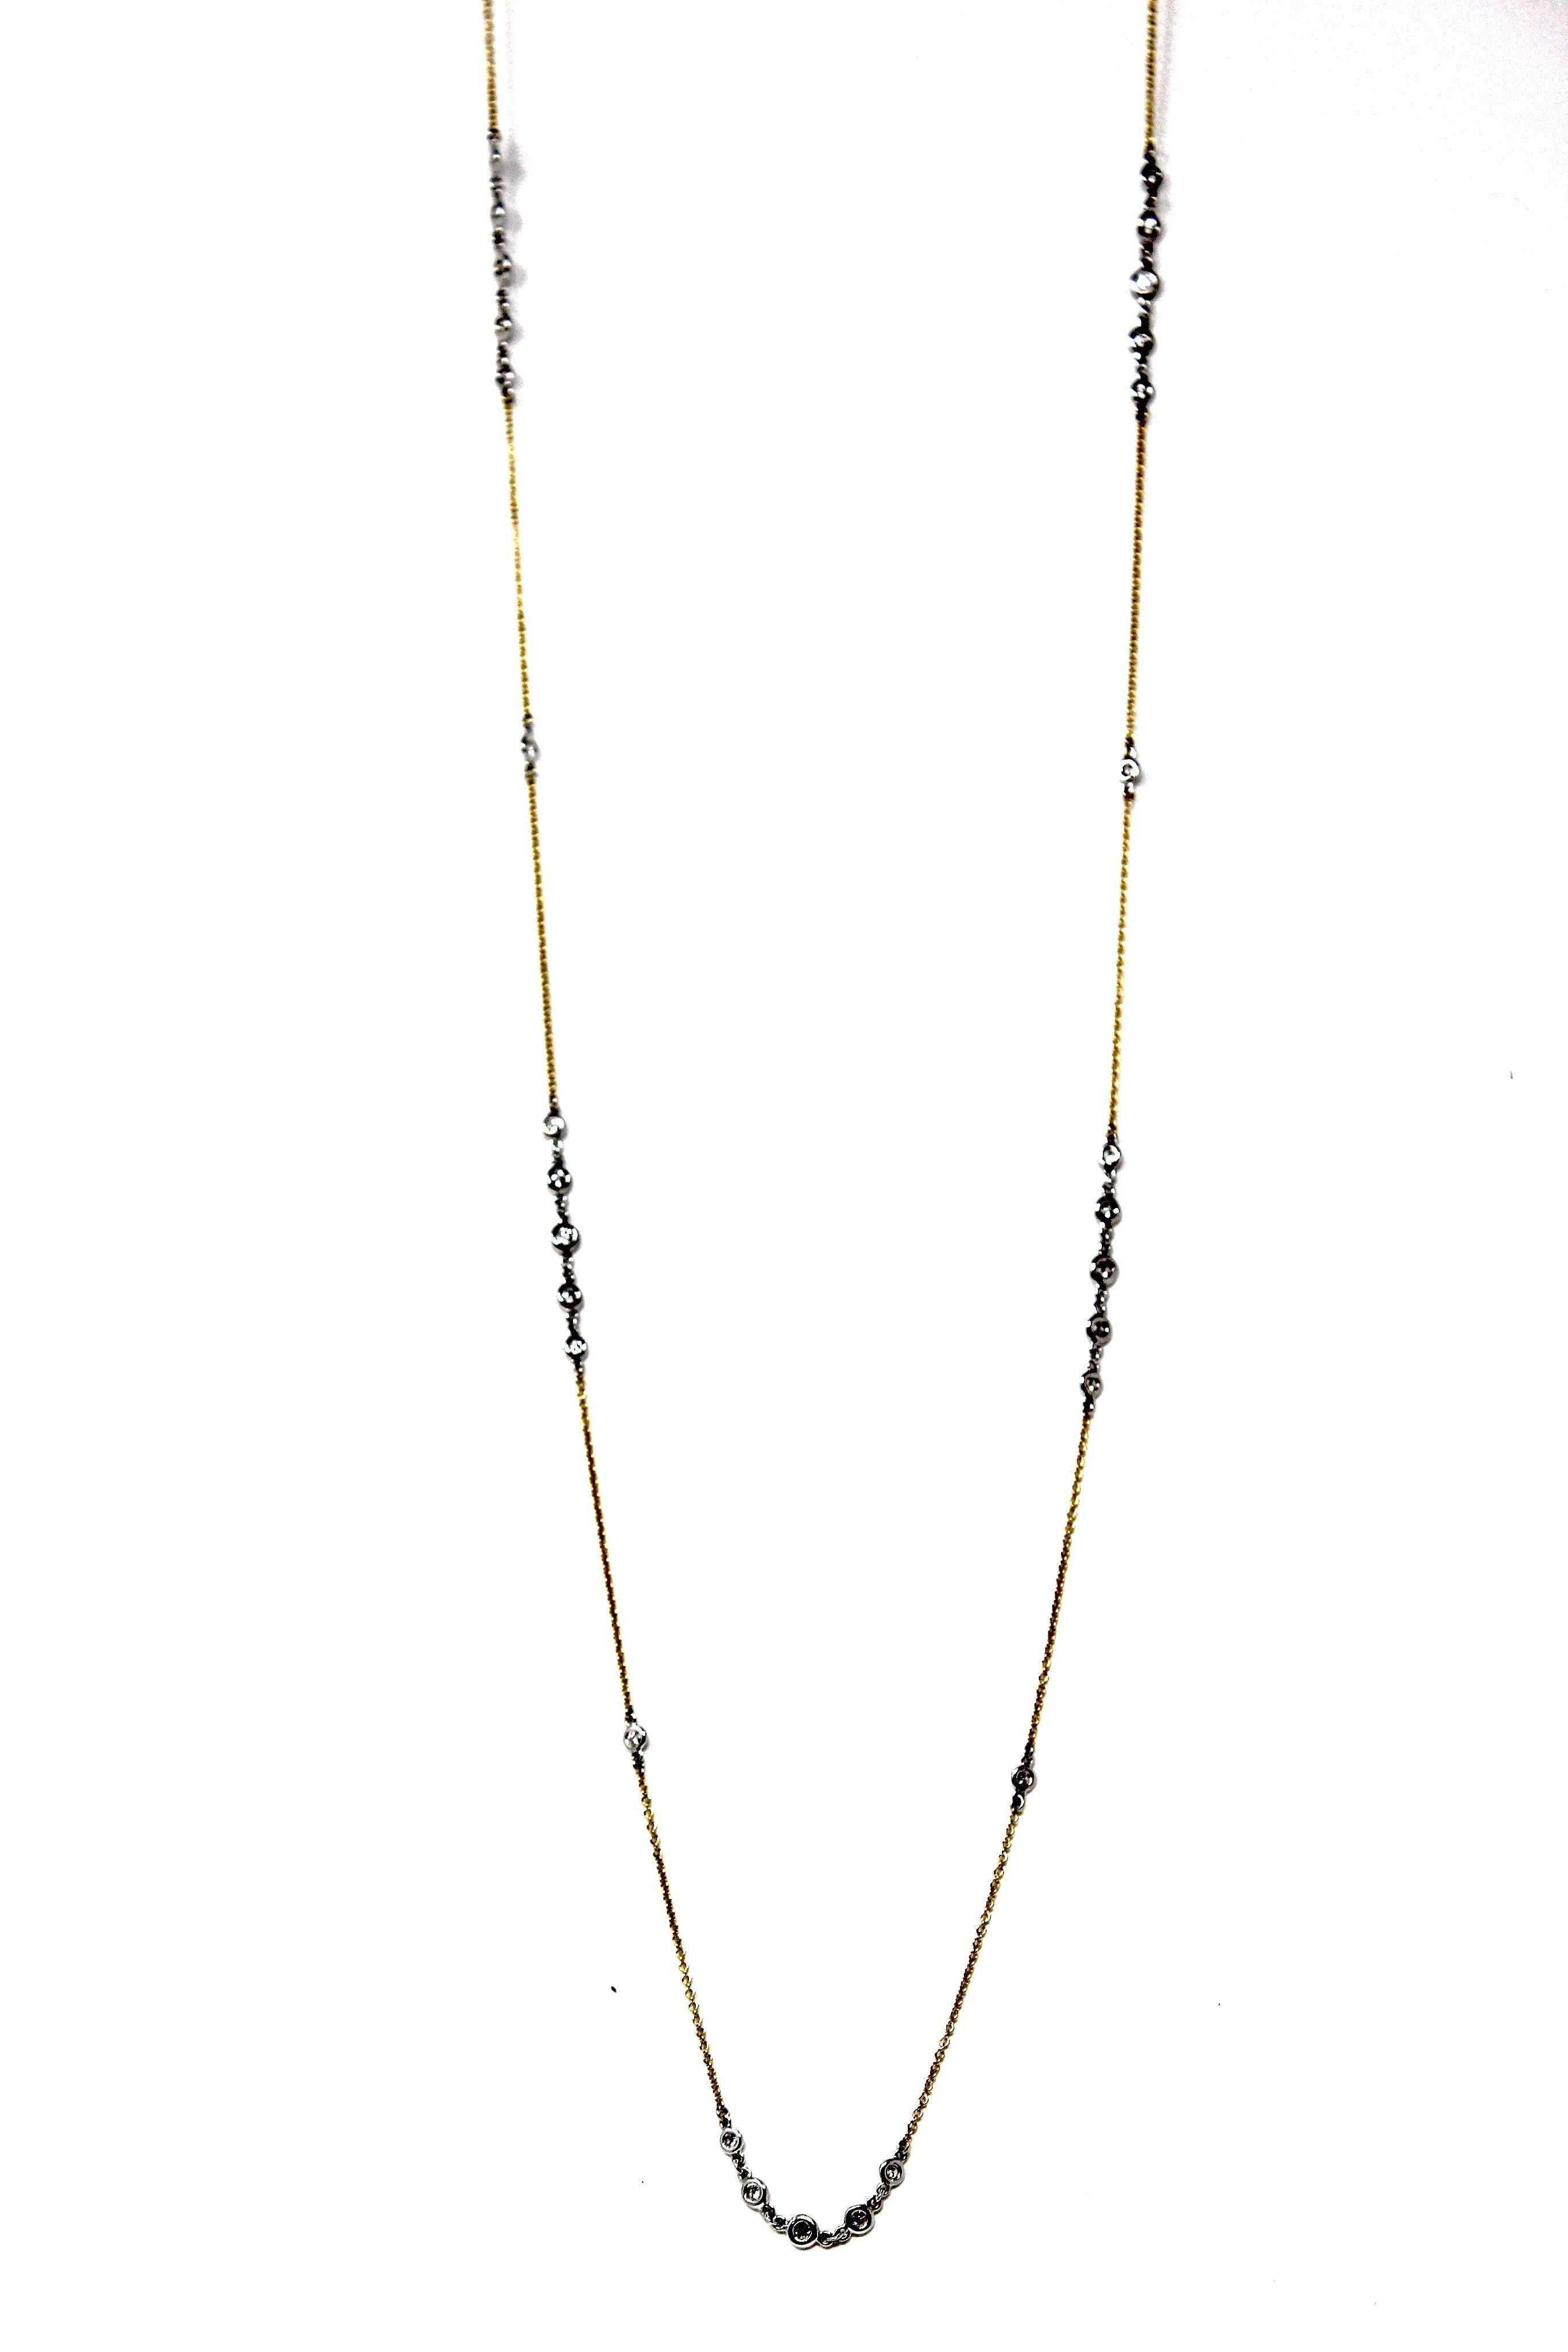 show necklace lengths